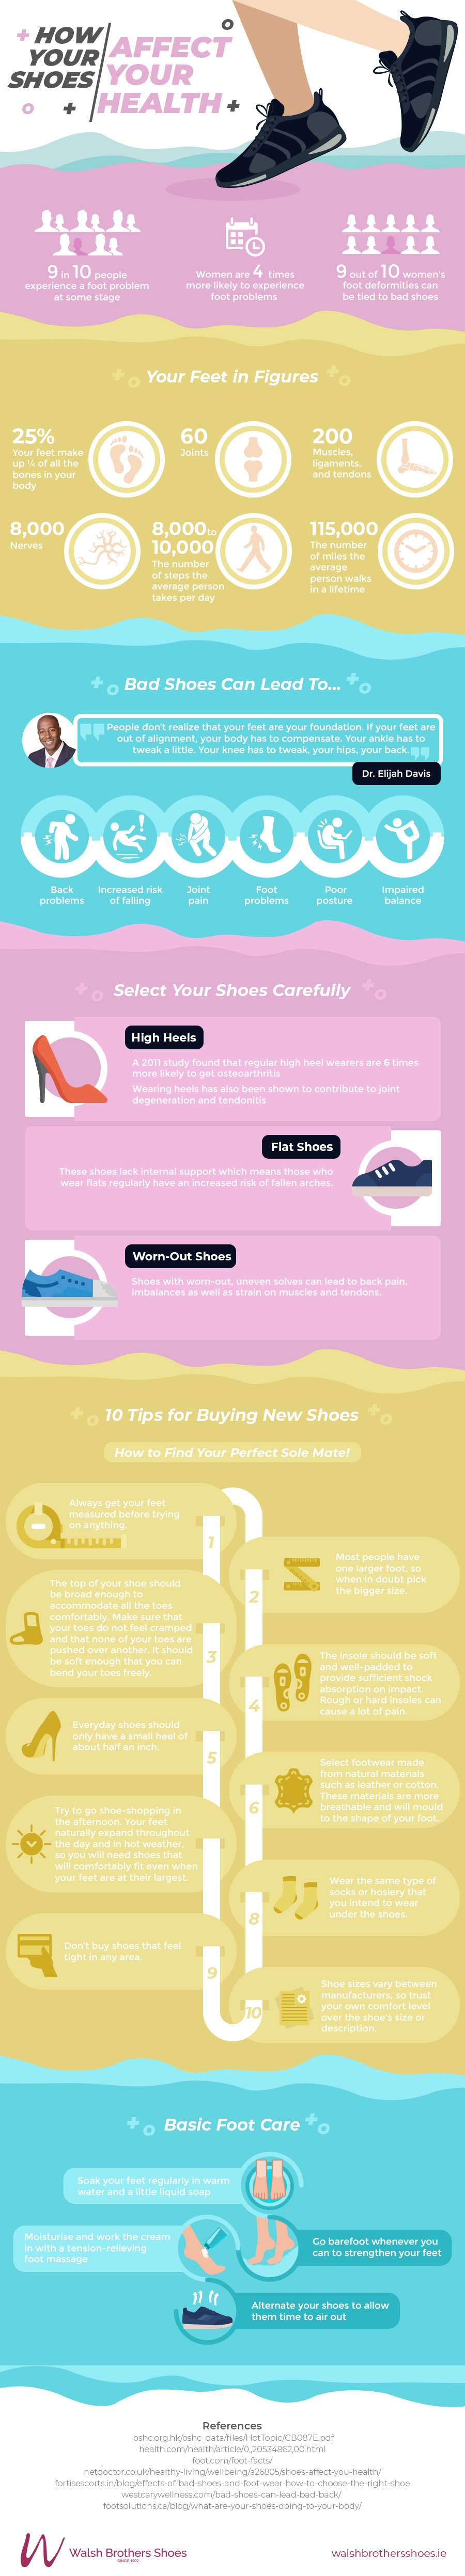 how-your-shoes-affect-your-health-infographic-walsh